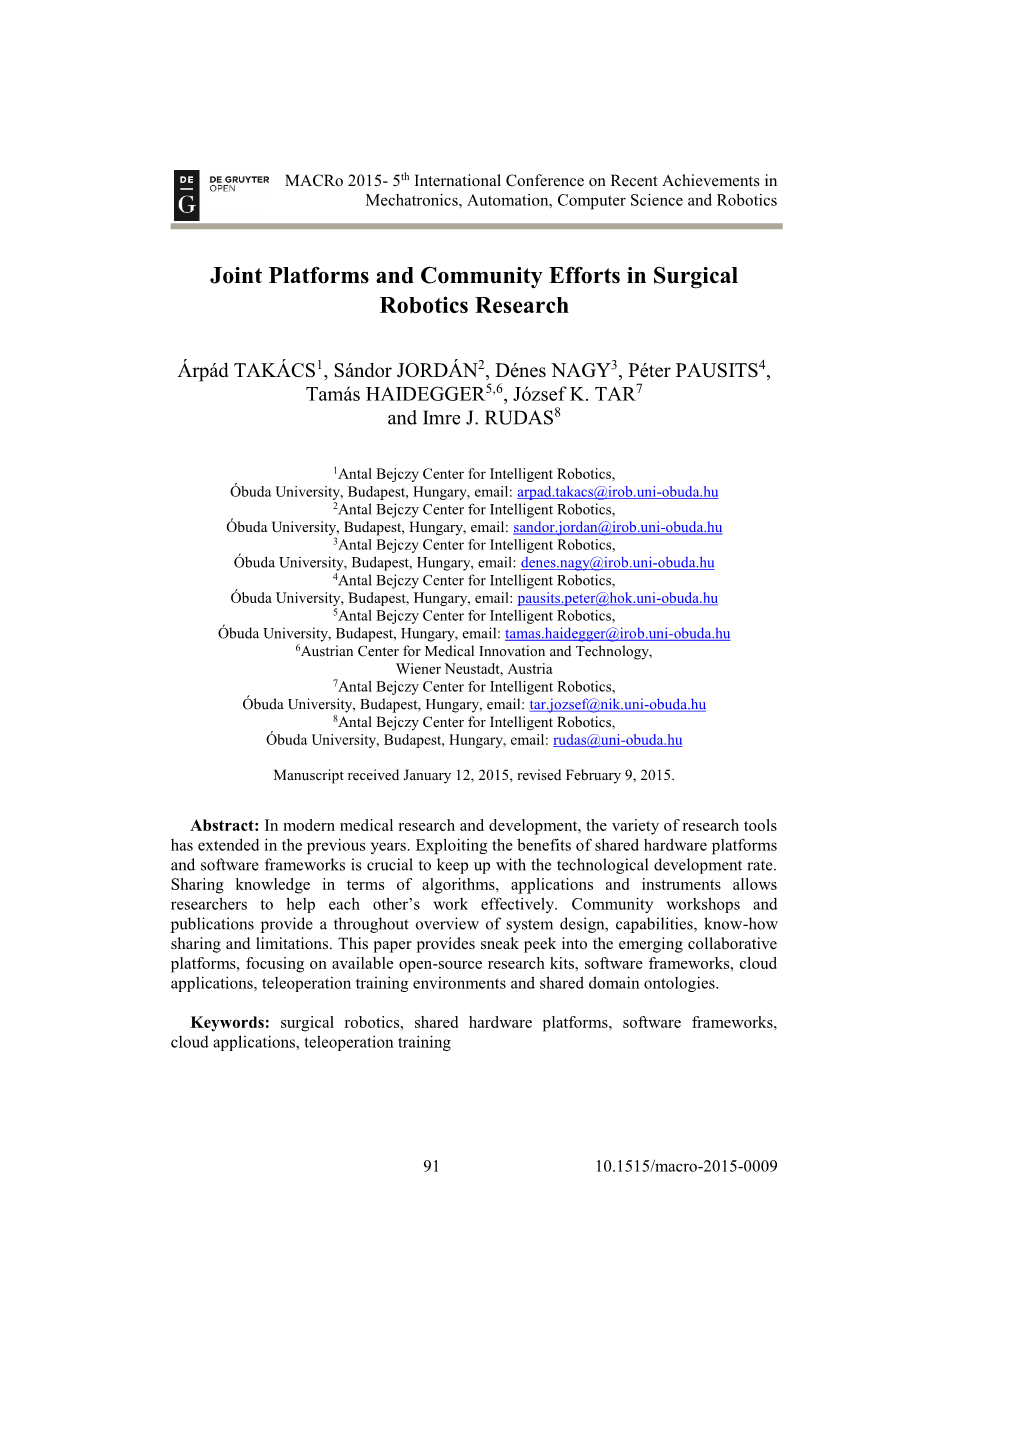 Joint Platforms and Community Efforts in Surgical Robotics Research